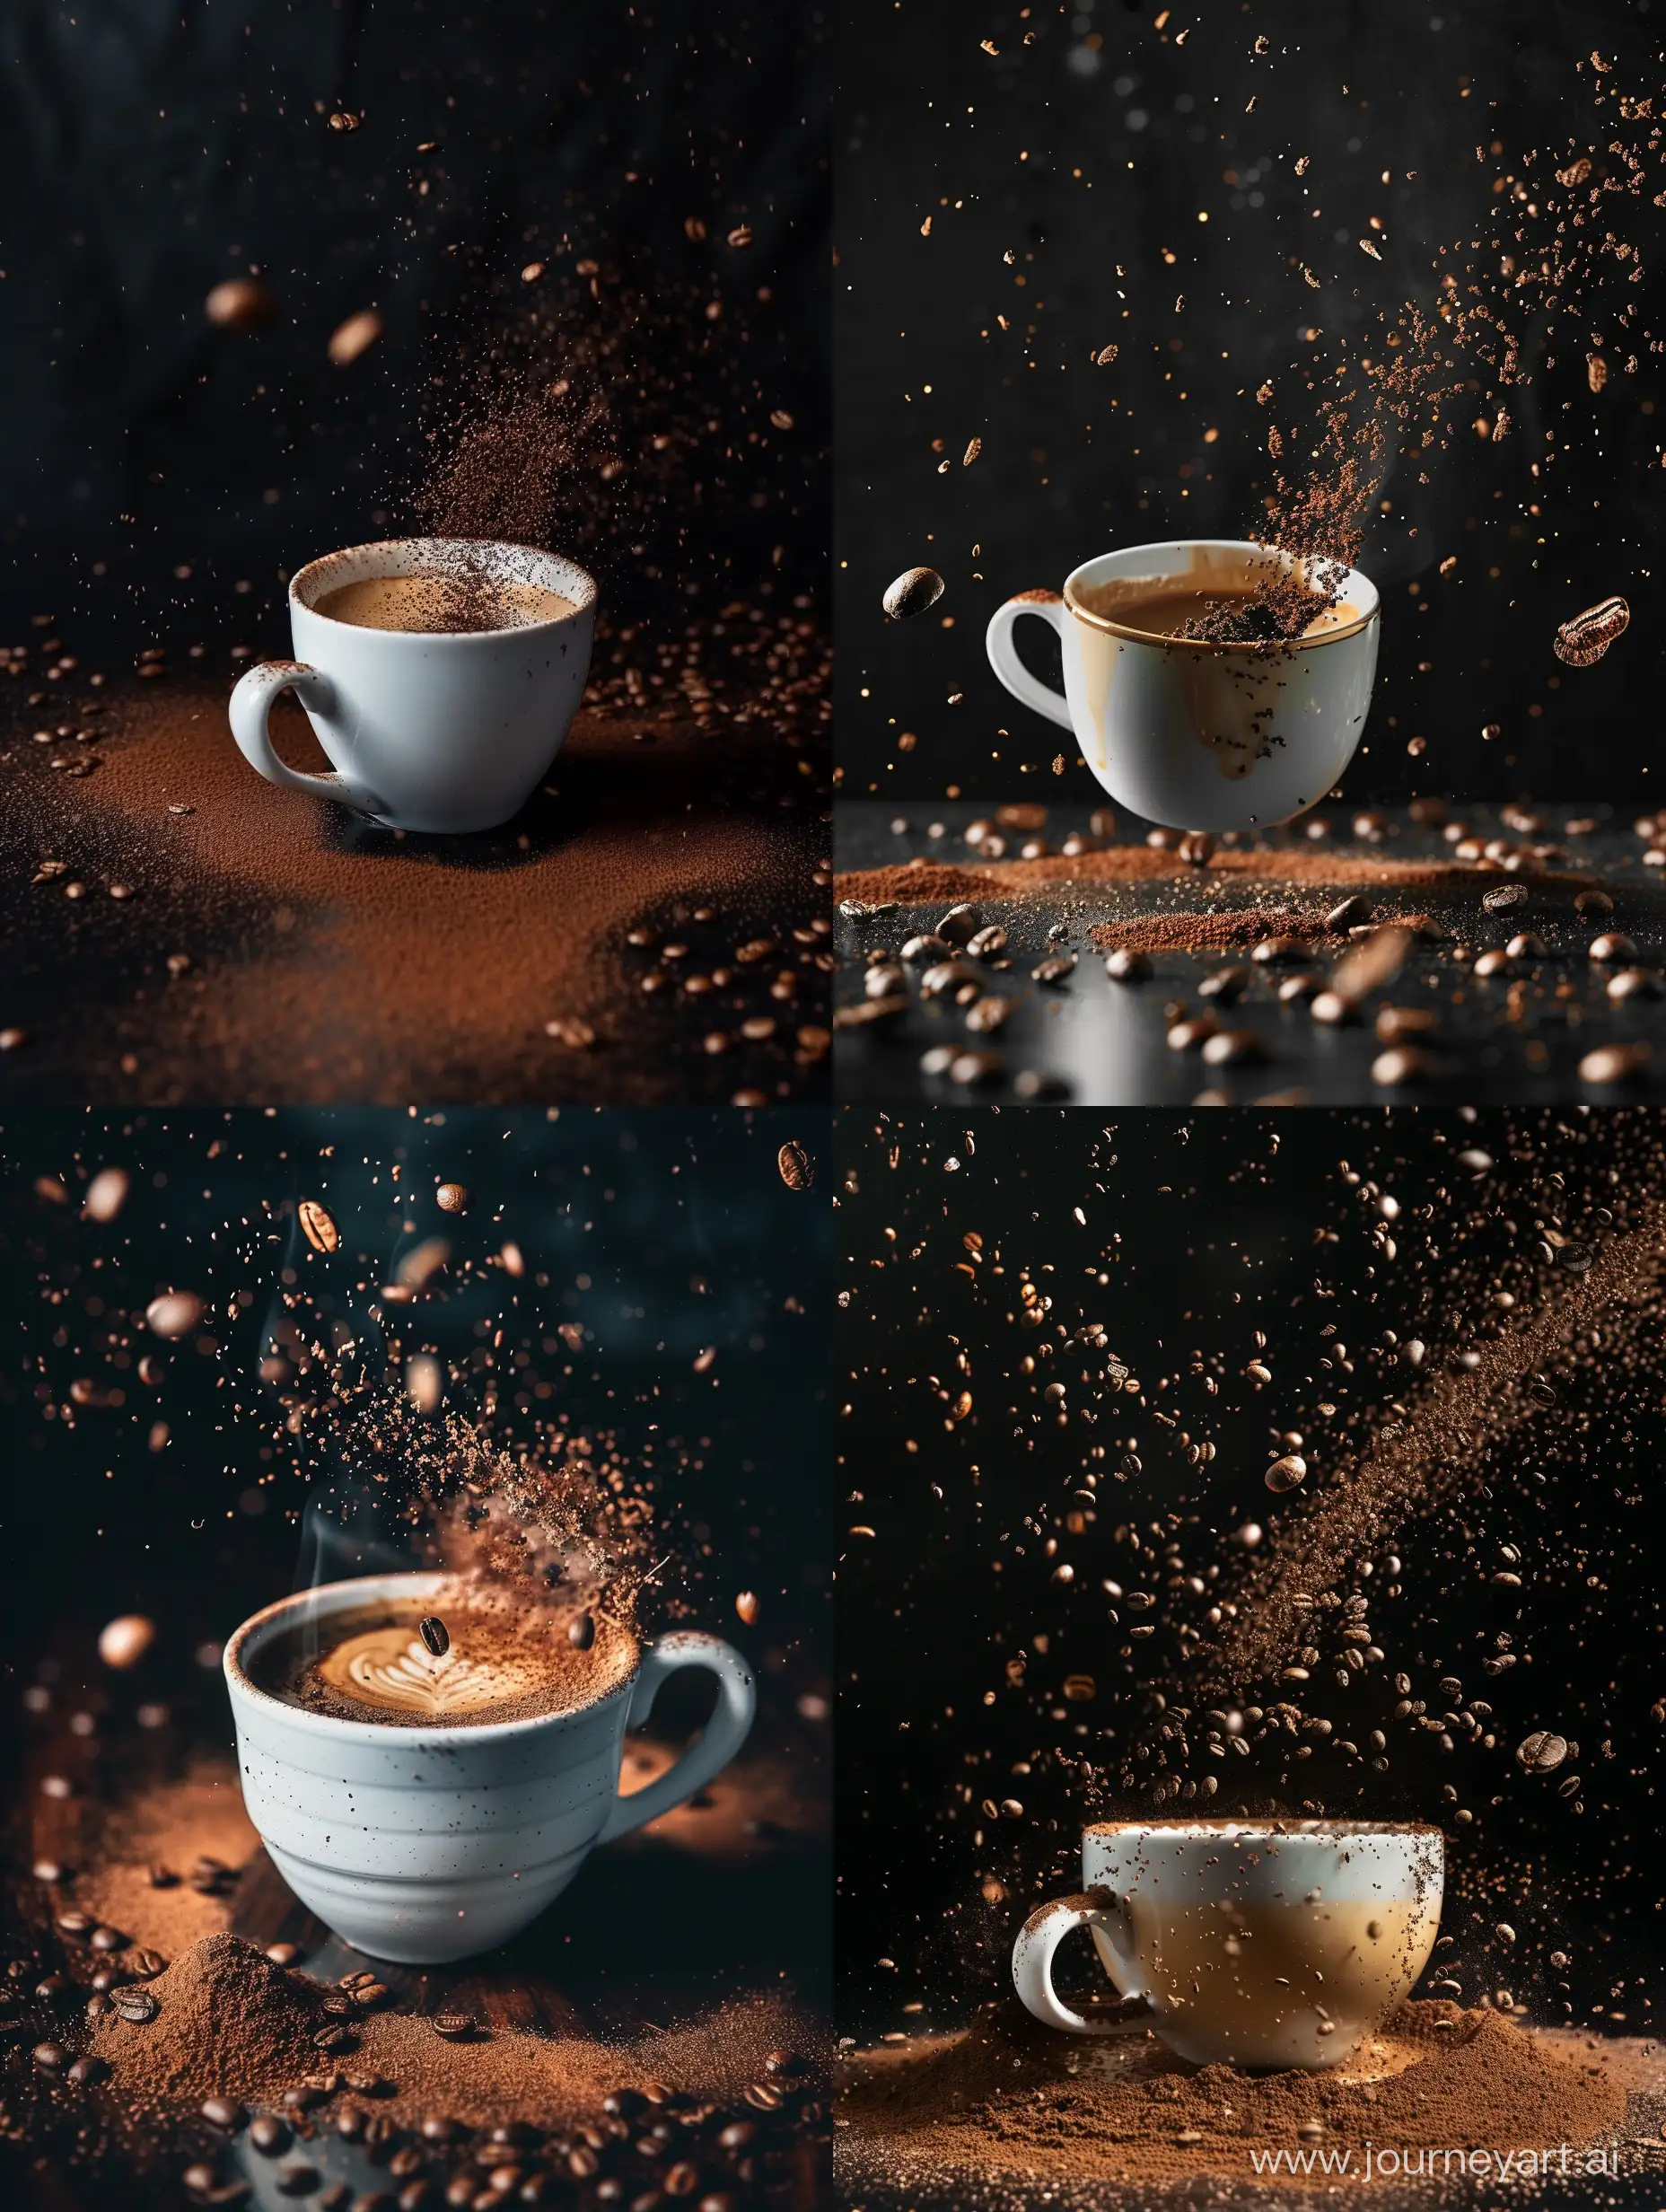 Energetic-Coffee-Moment-Capturing-the-Dynamic-Dance-of-Coffee-Grounds-in-the-Air